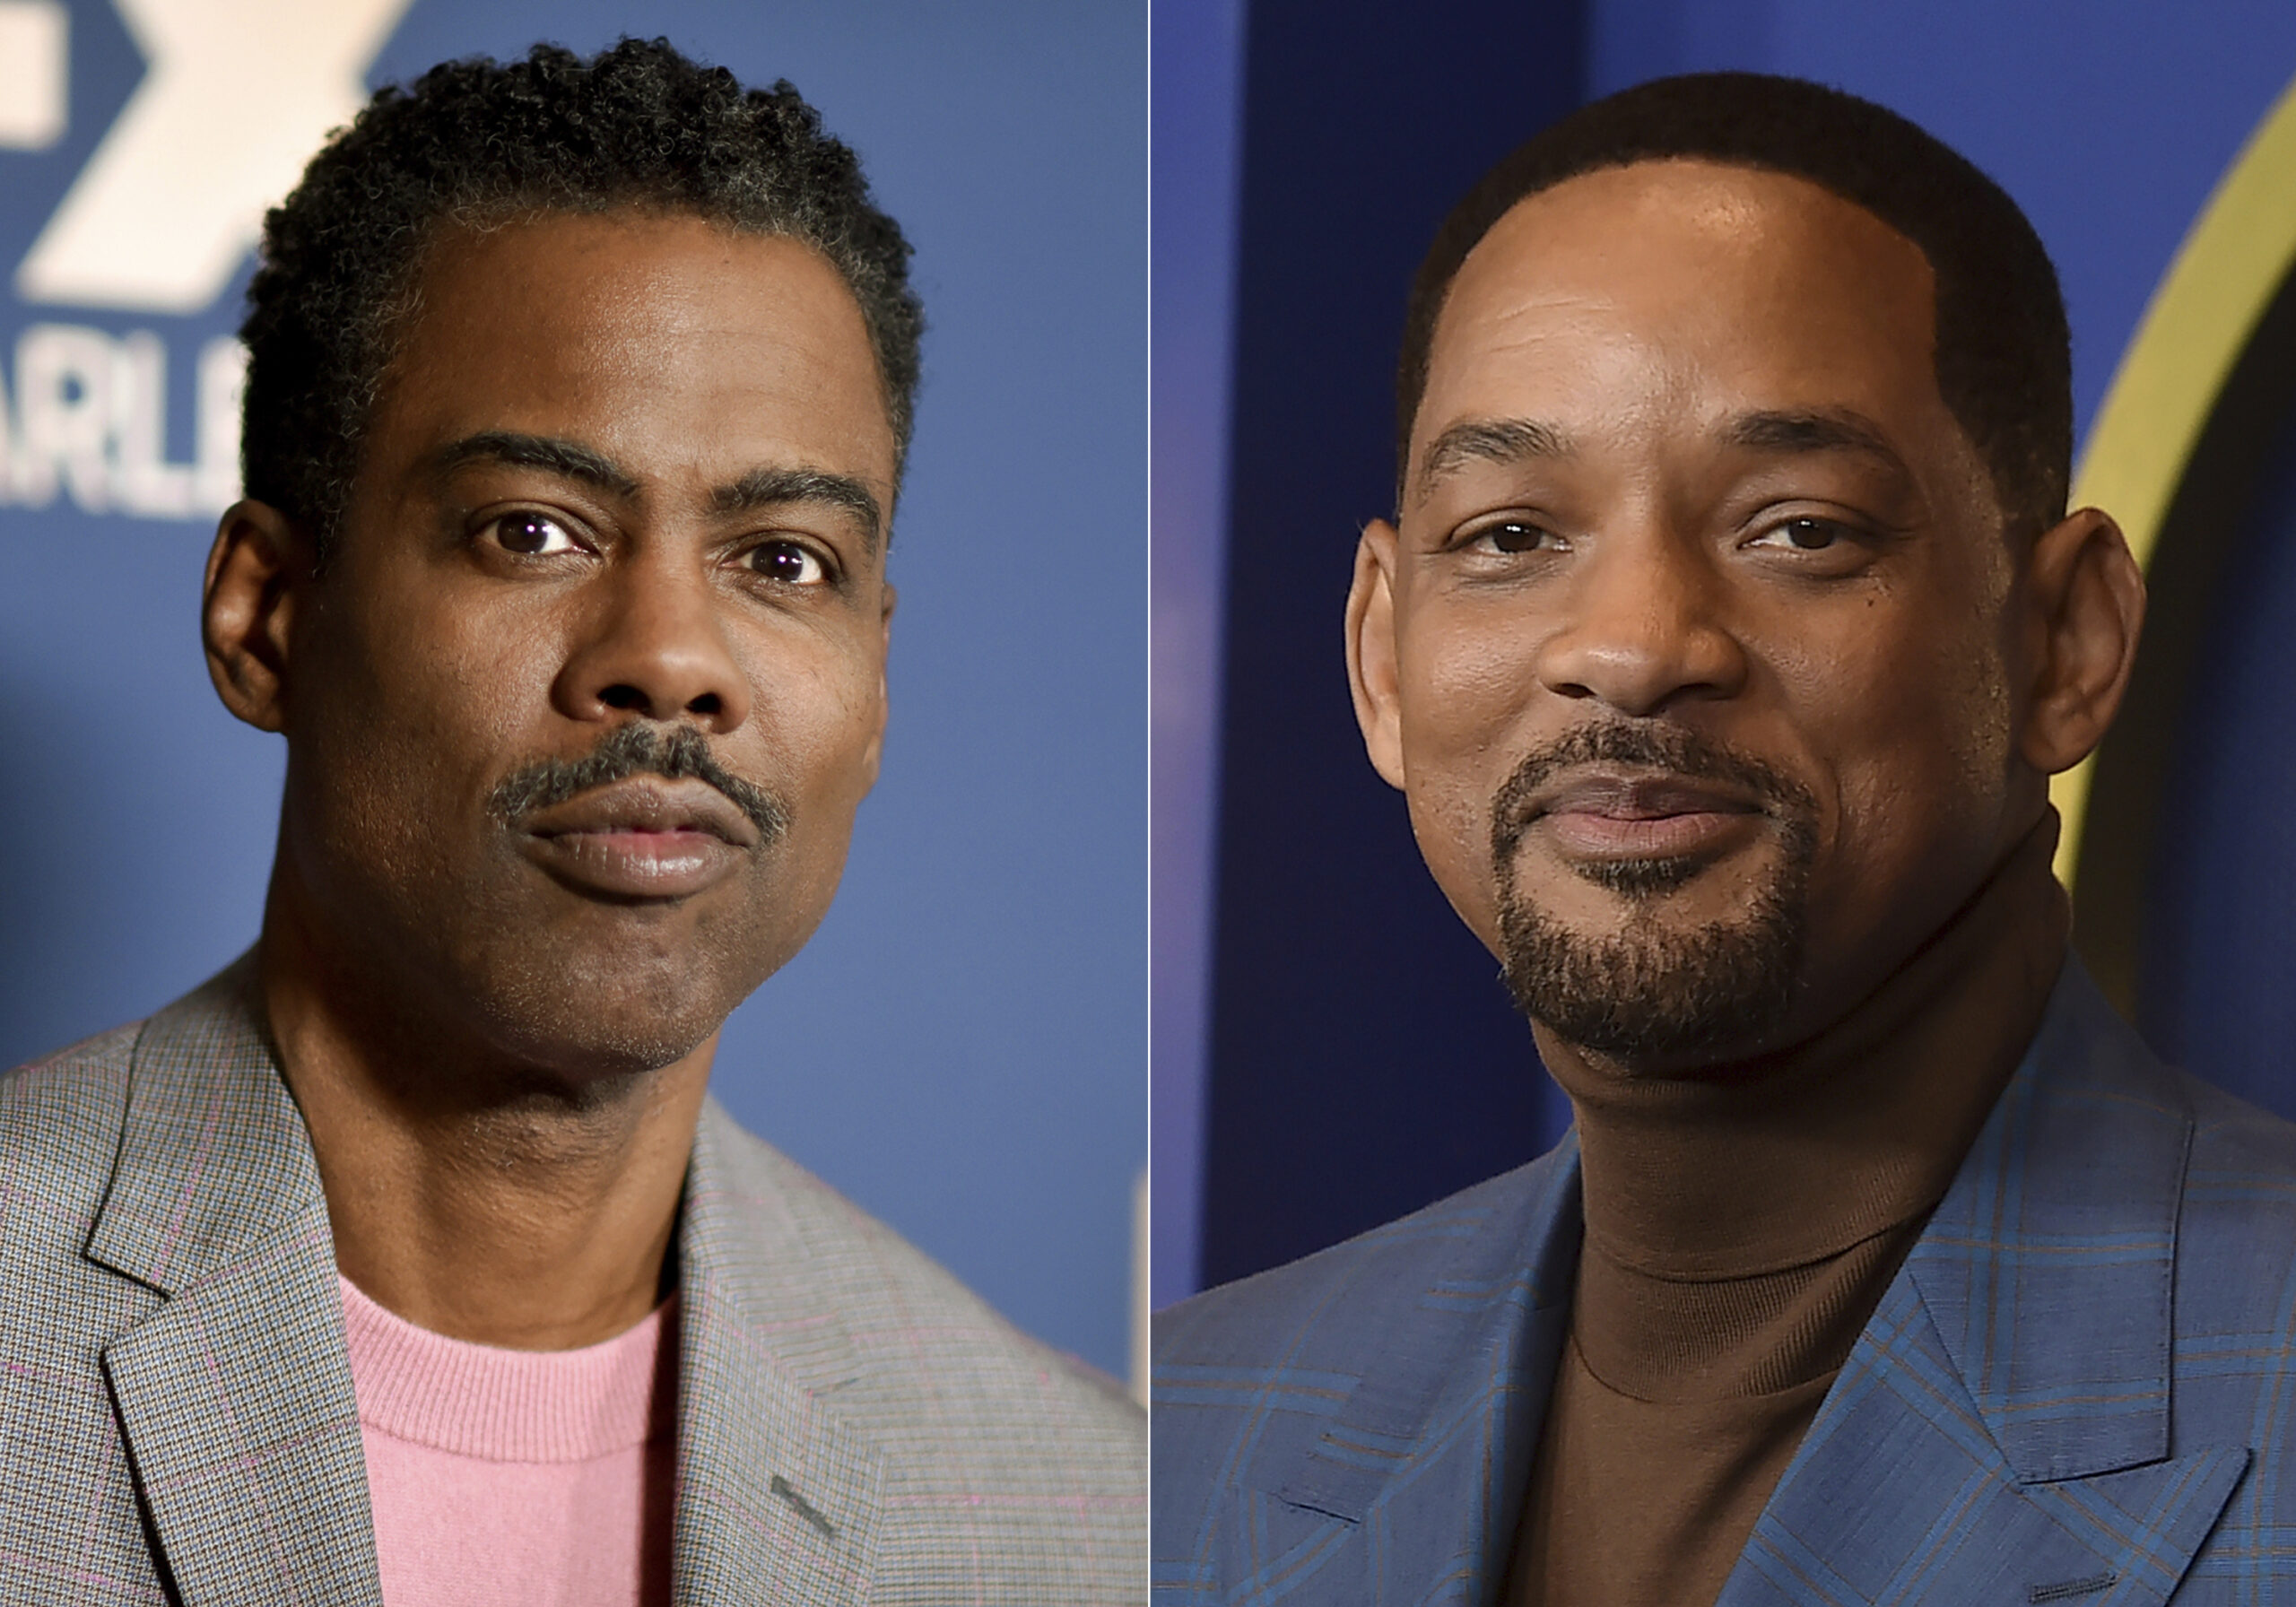 Chris Rock appears at the the FX portion of theTelevision Critics Association Winter press tour in Pasadena, Calif., on Jan. 9, 2020, left, and Will Smith appears at the 94th Academy Awards nominees luncheon in Los Angeles on March 7, 2022. Smith was banned from Oscars, other film academy events for 10 years for slapping Rock onstage at Academy Awards. (AP Photo)